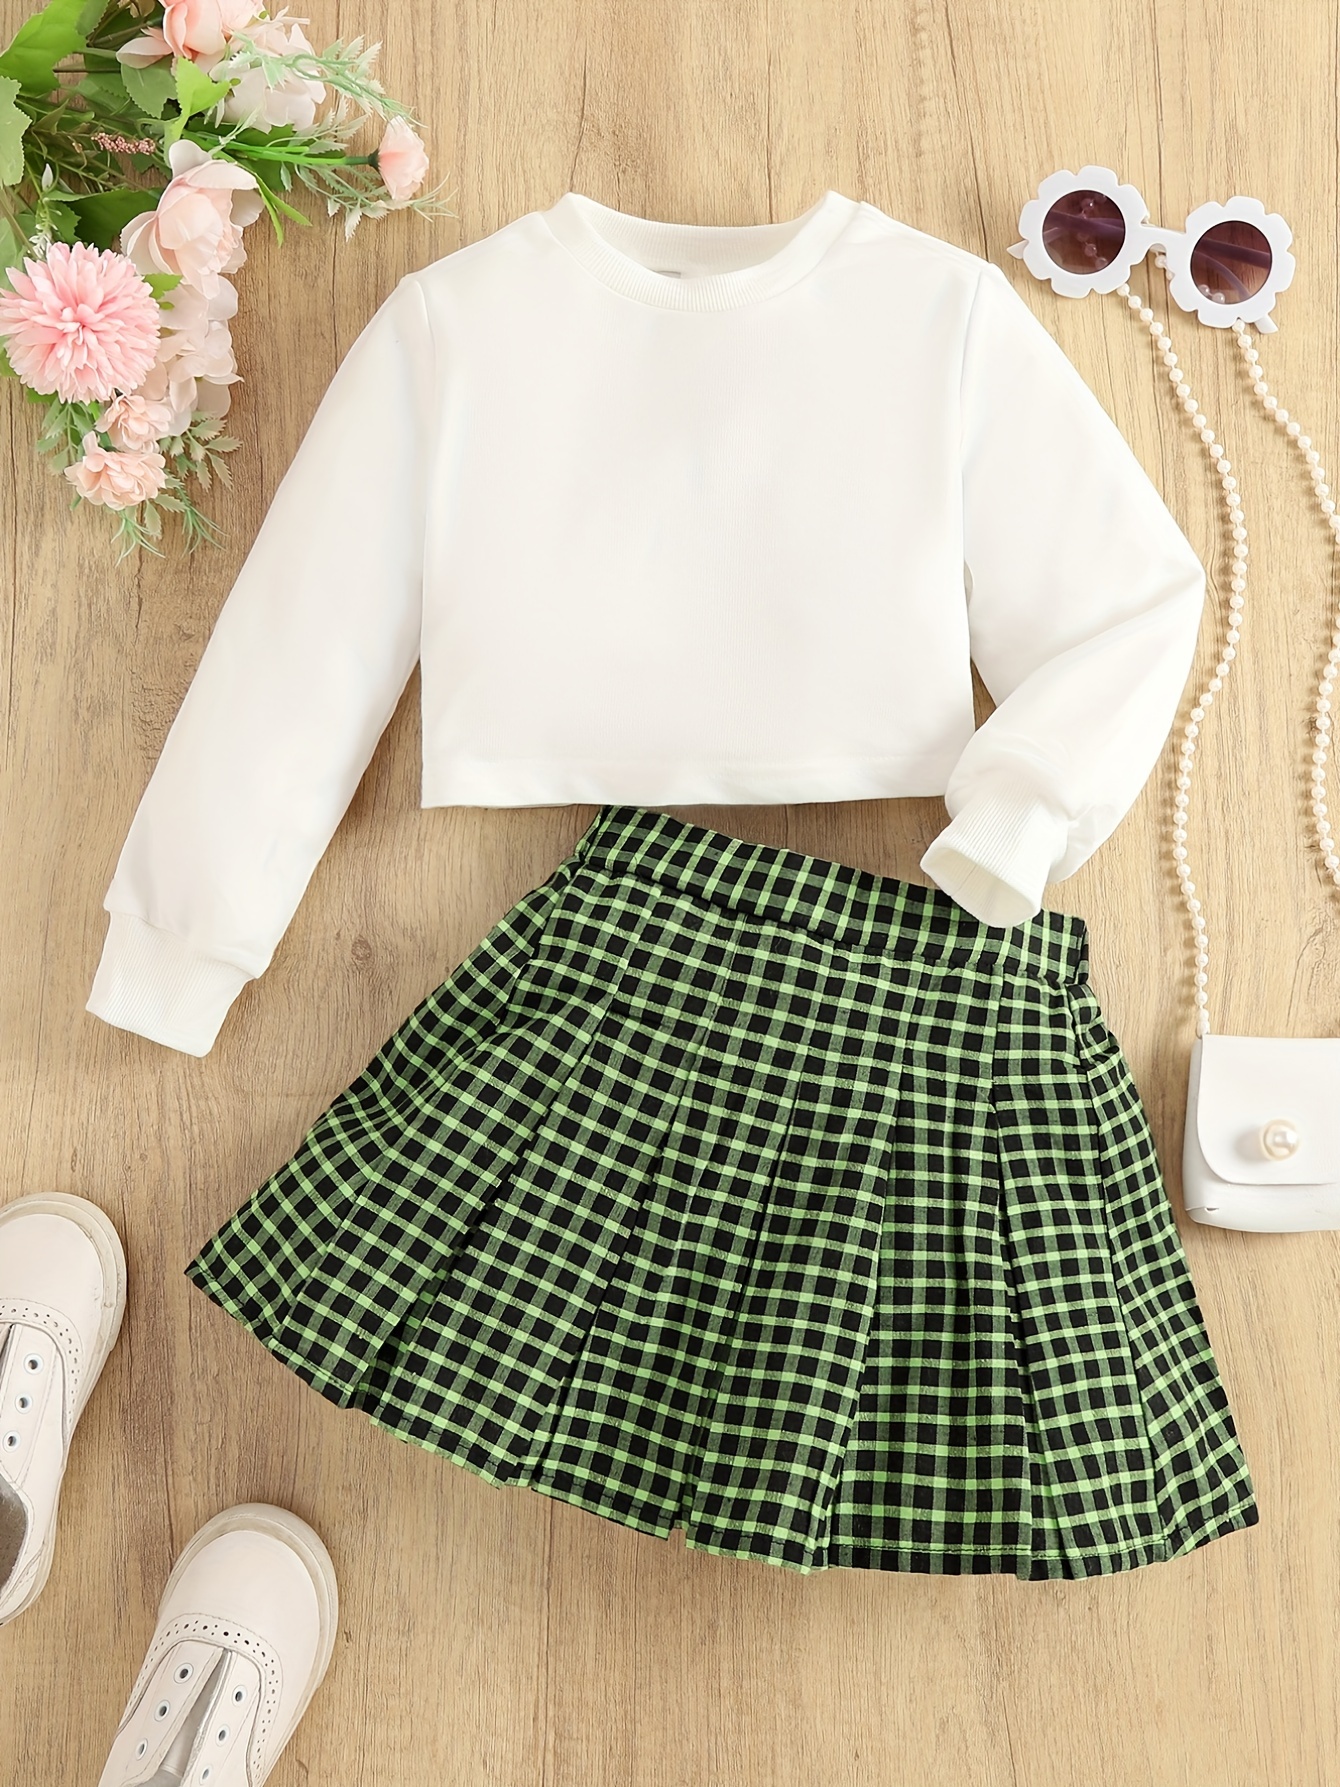 Girls' 2-piece Preppy Style Outfits, Butterfly Print Top & Plaid Pleated  Skirt, Comfy Sets Kids Clothes For Spring Fall